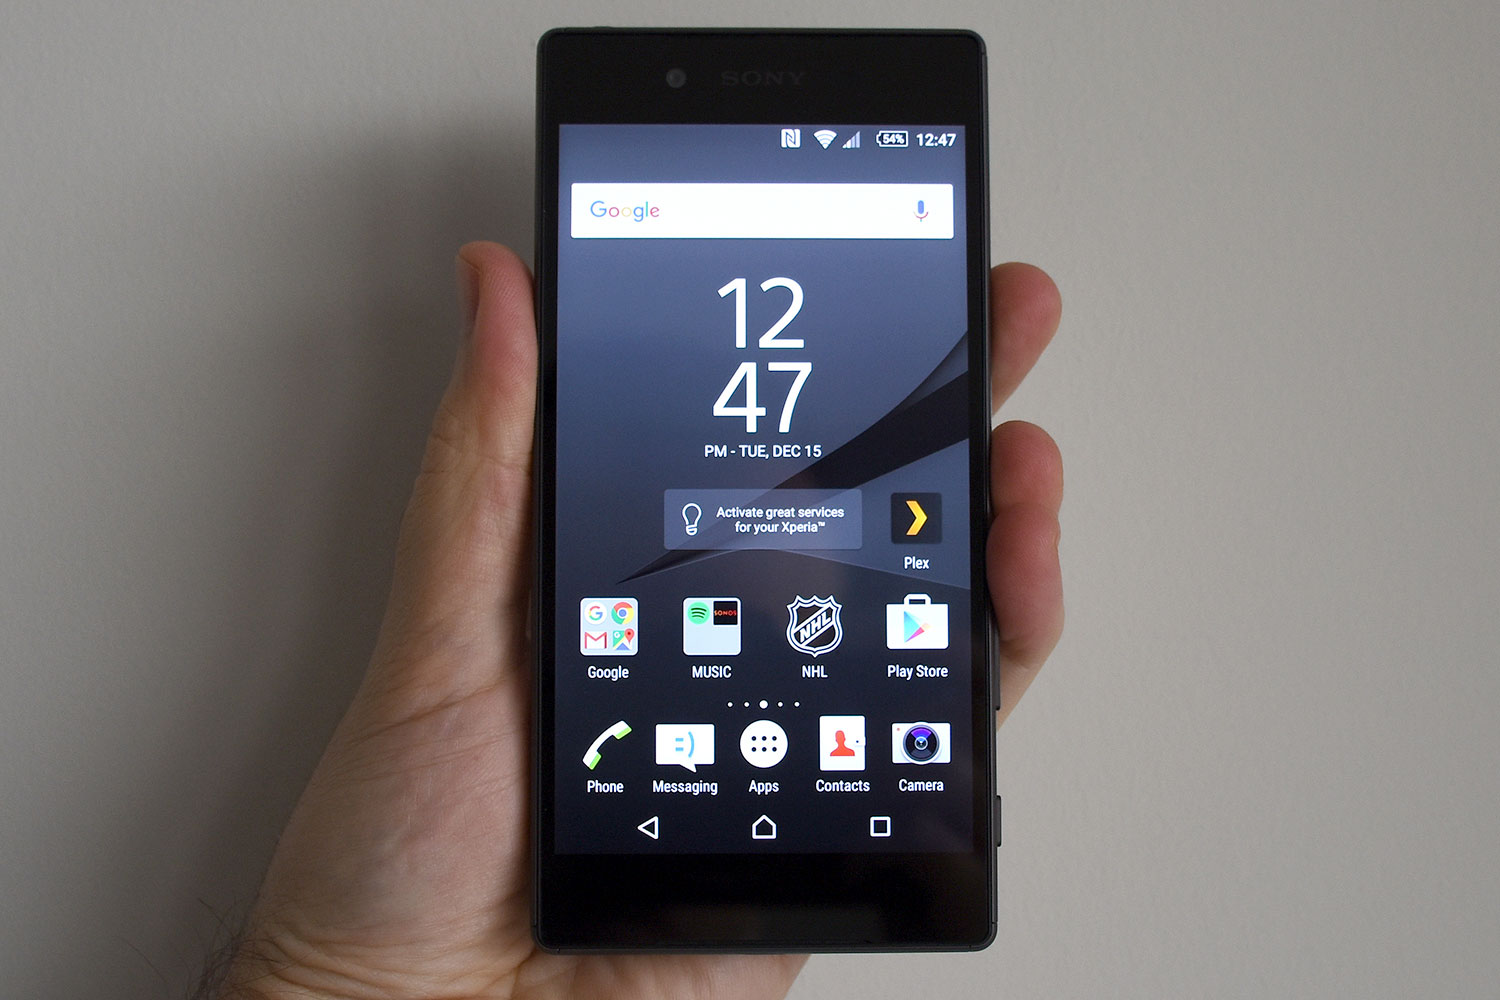 Polar Boquilla Logro Sony Xperia Z5 | Full Review, Specs, Price, and More | Digital Trends